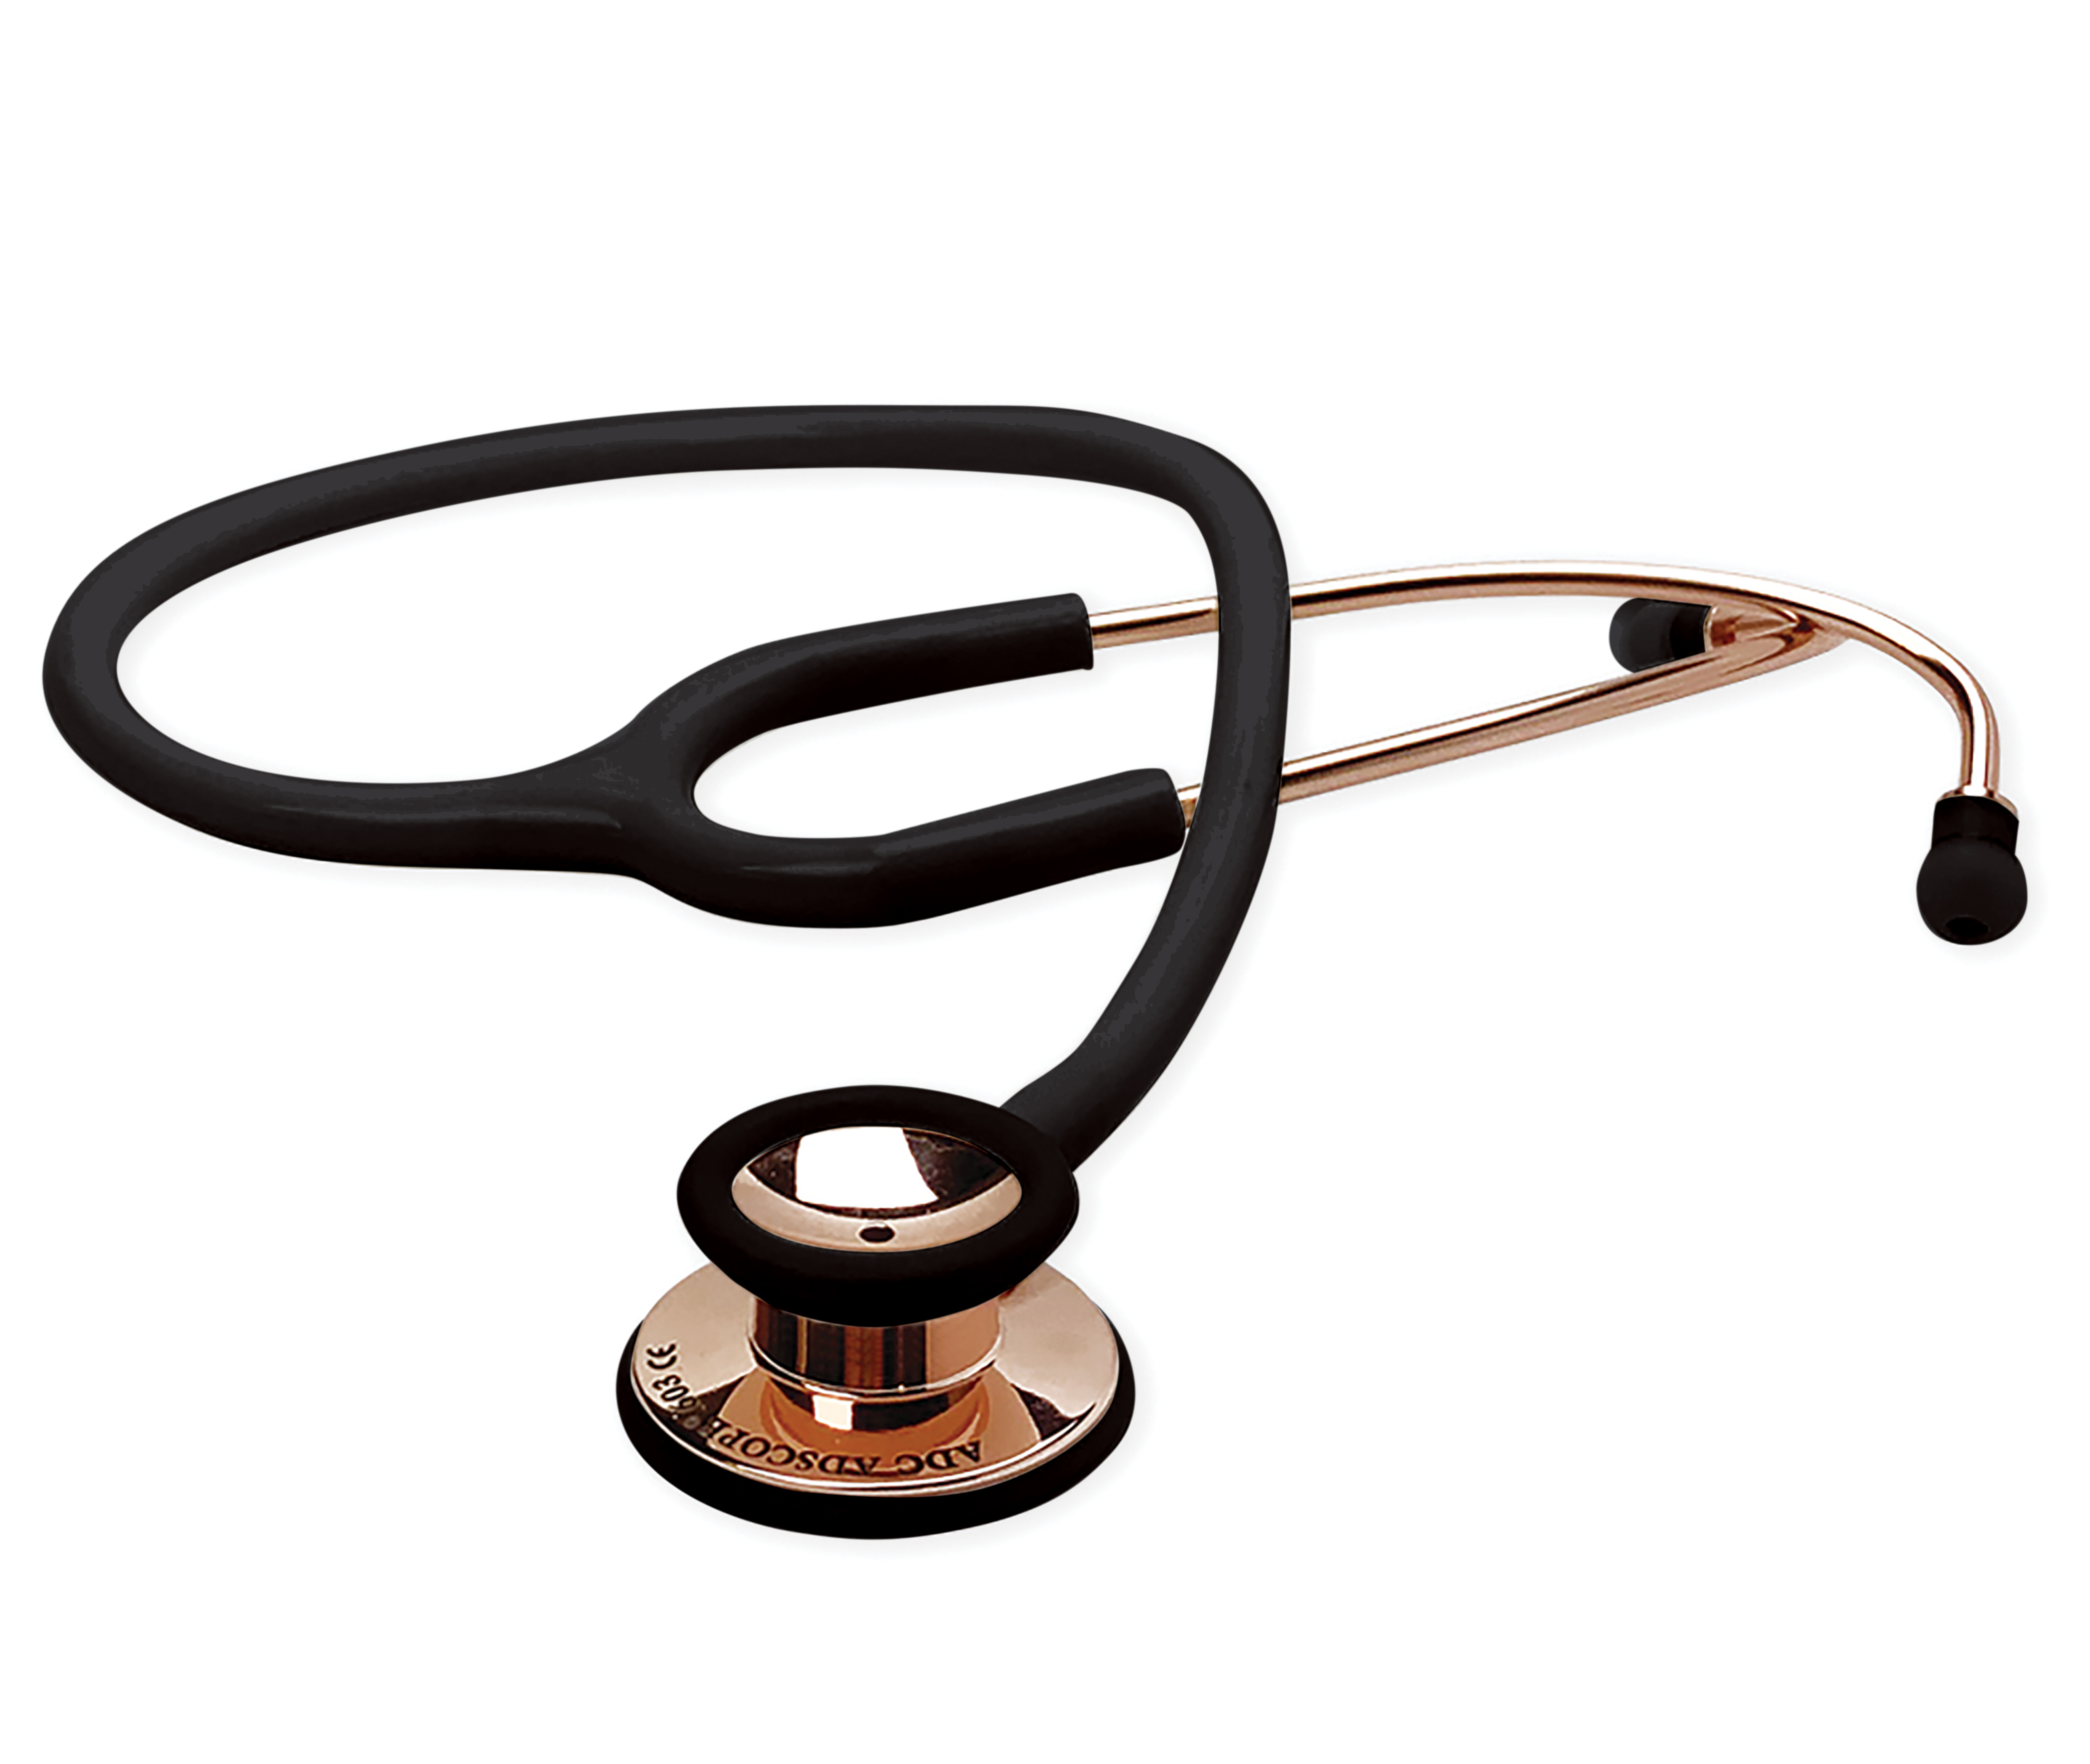 Adscope® 601 Convertible Cardiology Stethoscope, Rose Gold F